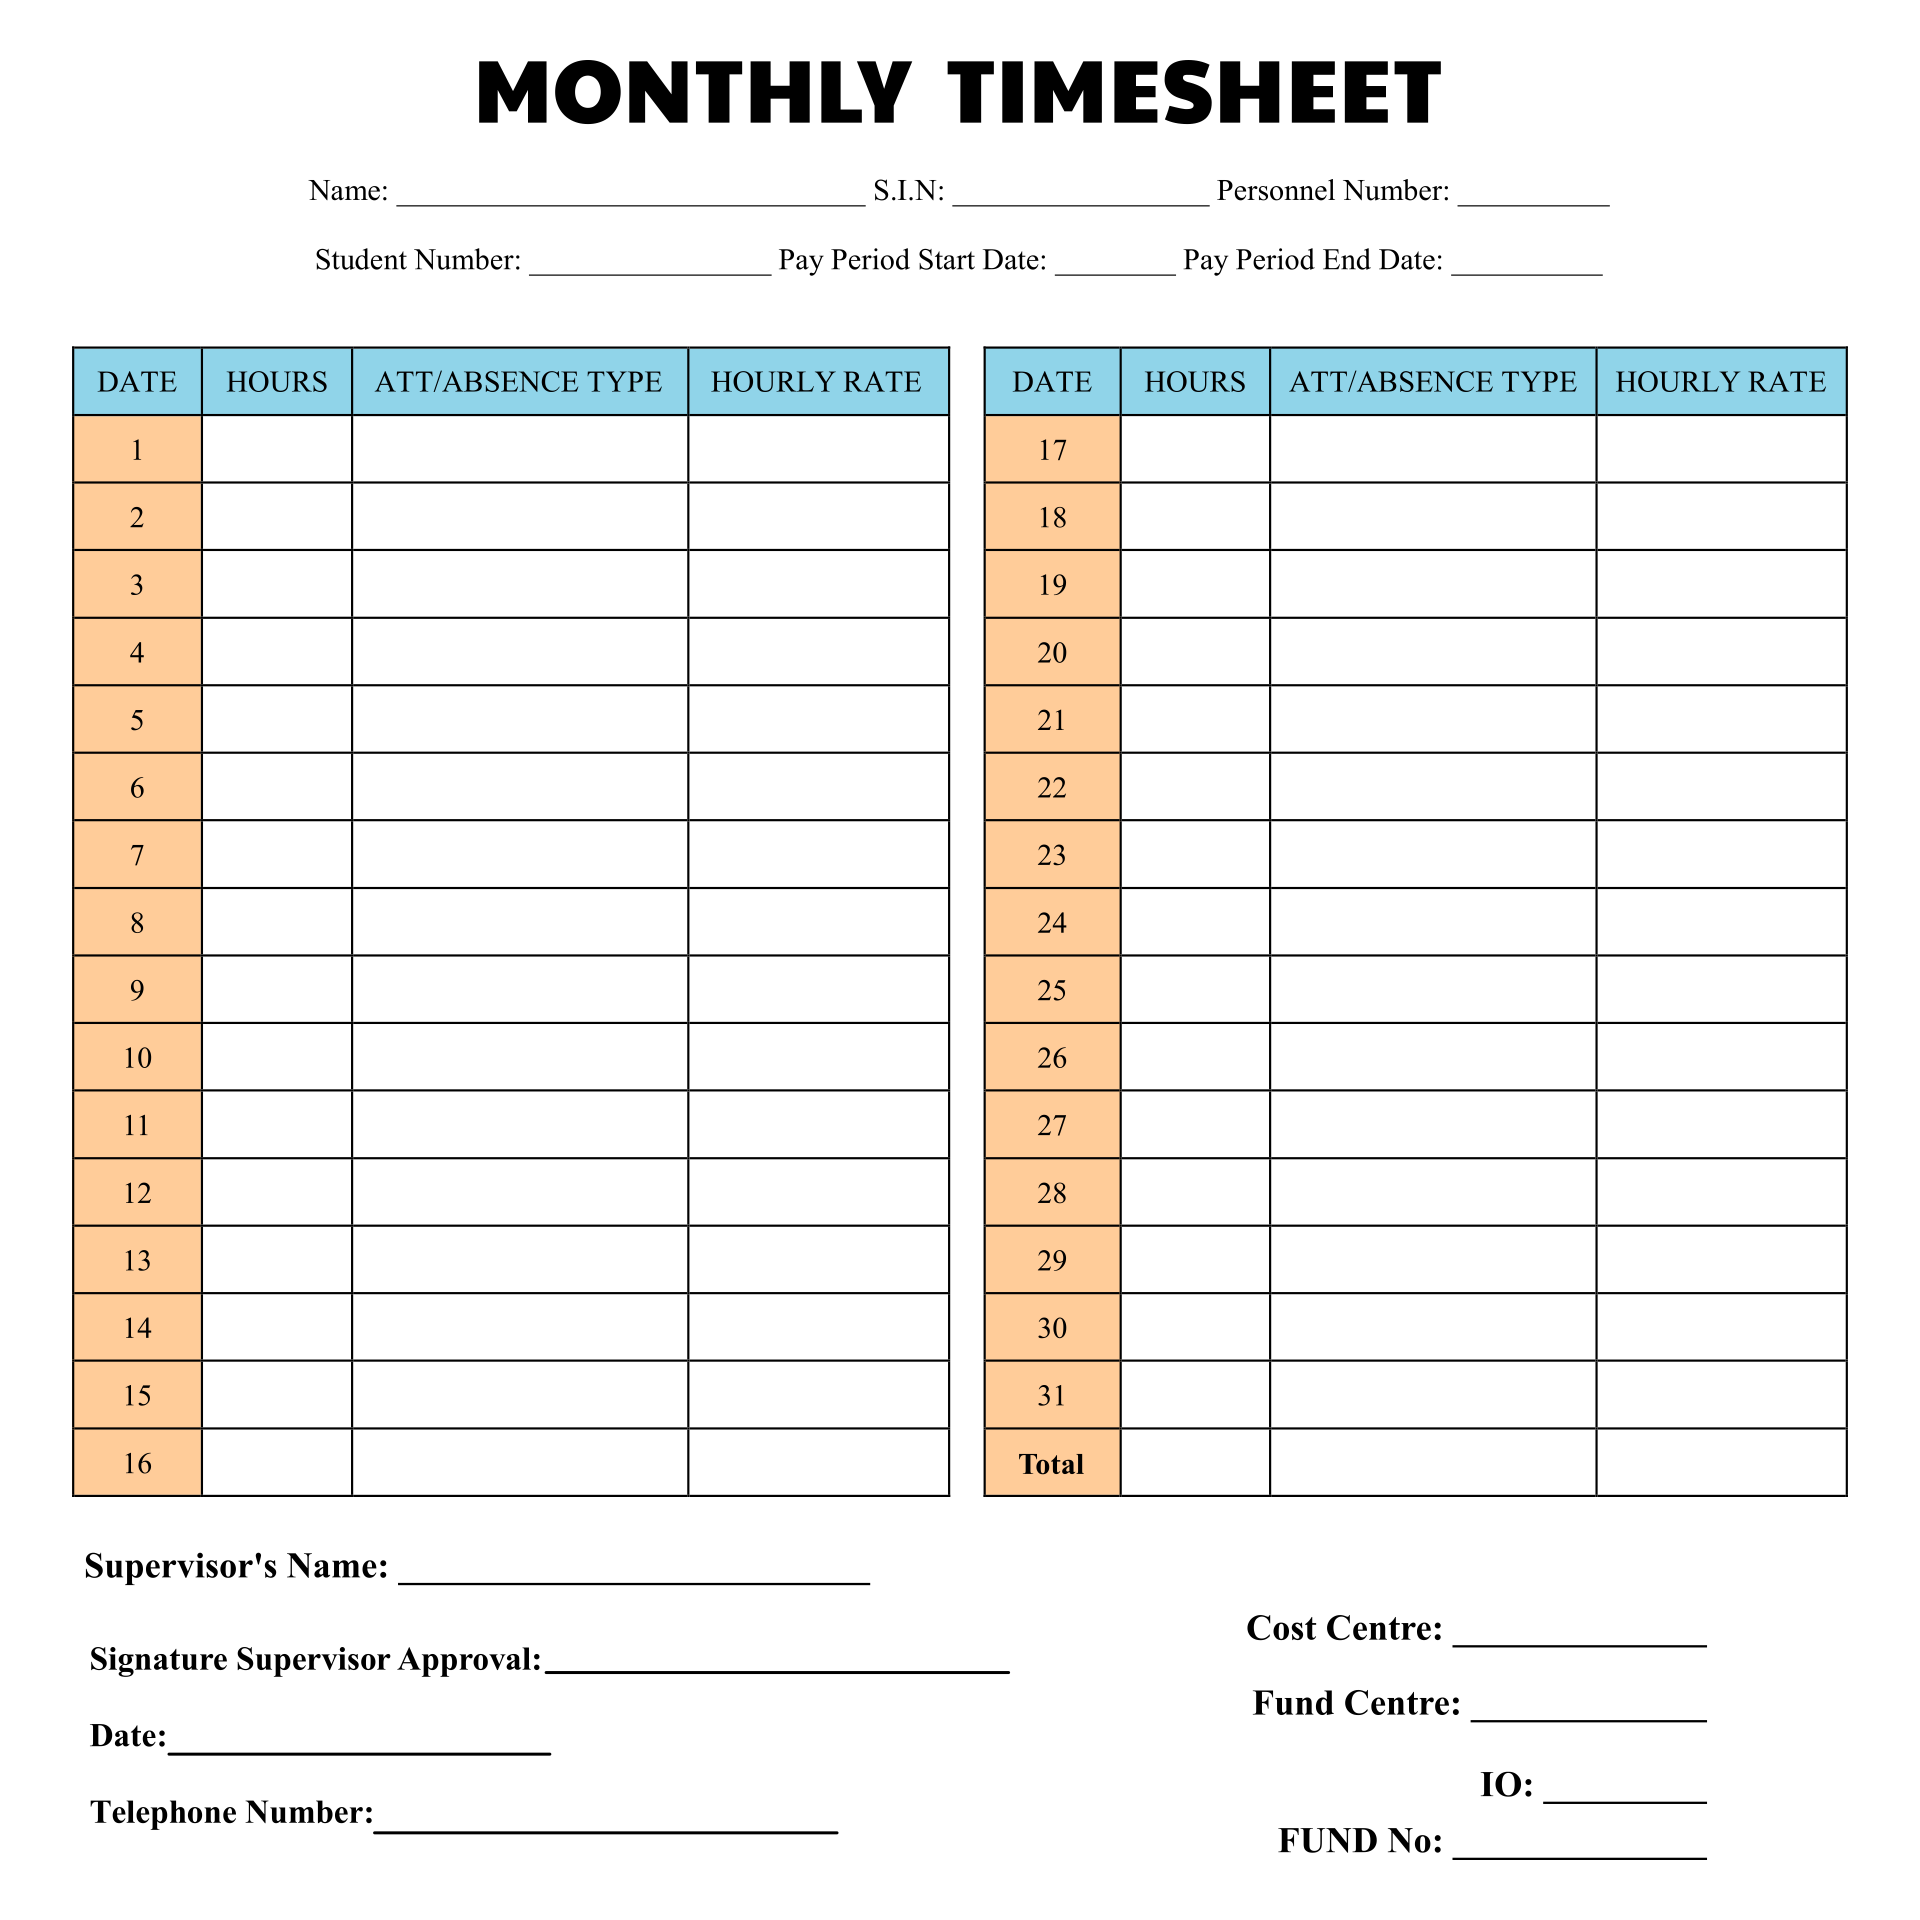 monthly-timesheet-template